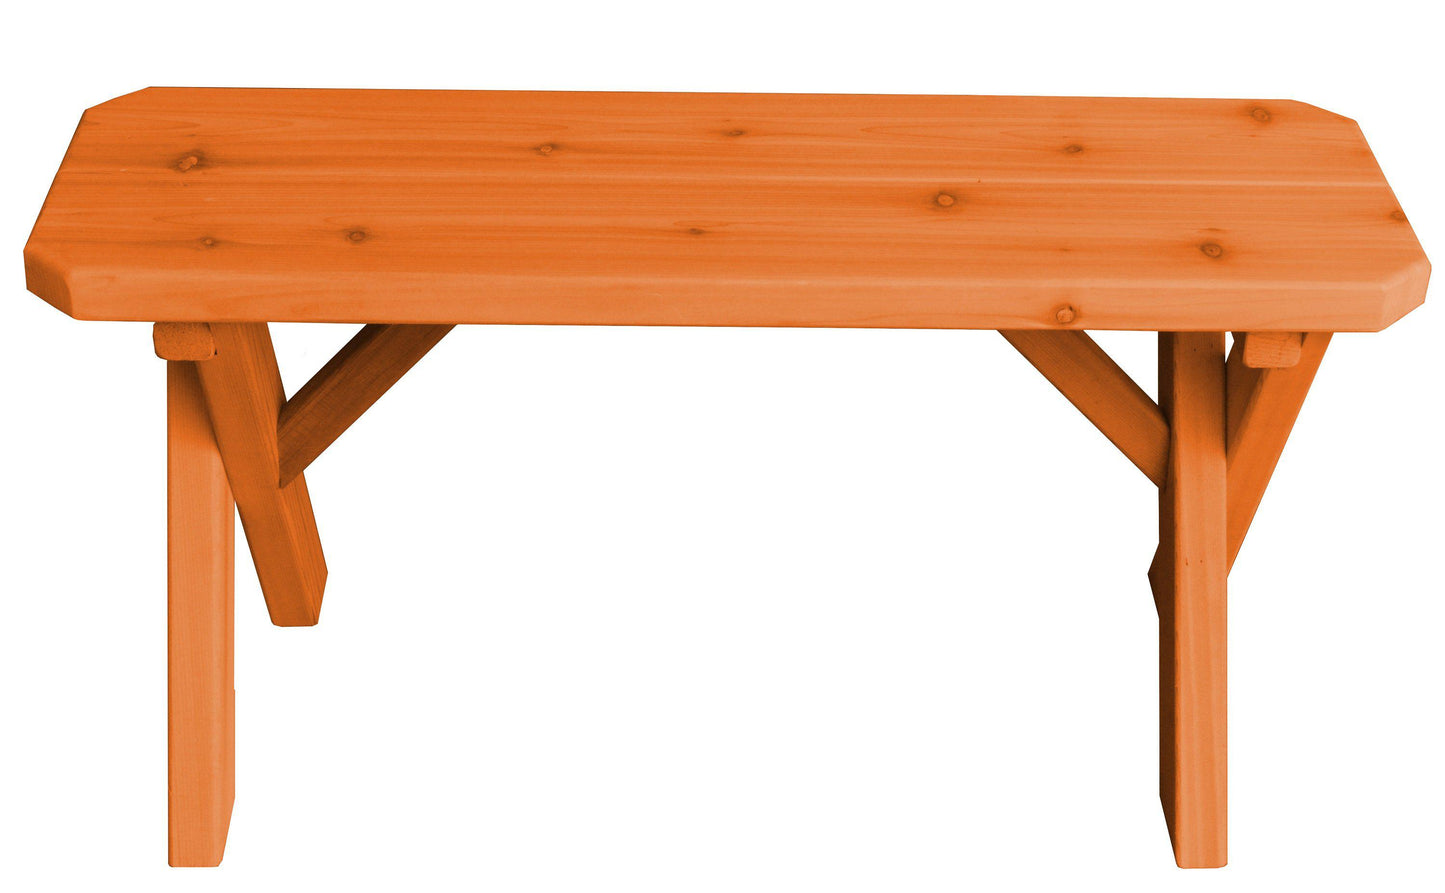 A&L FURNITURE CO. Western Red Cedar 33" Crossleg Bench Only - LEAD TIME TO SHIP 4 WEEKS OR LESS